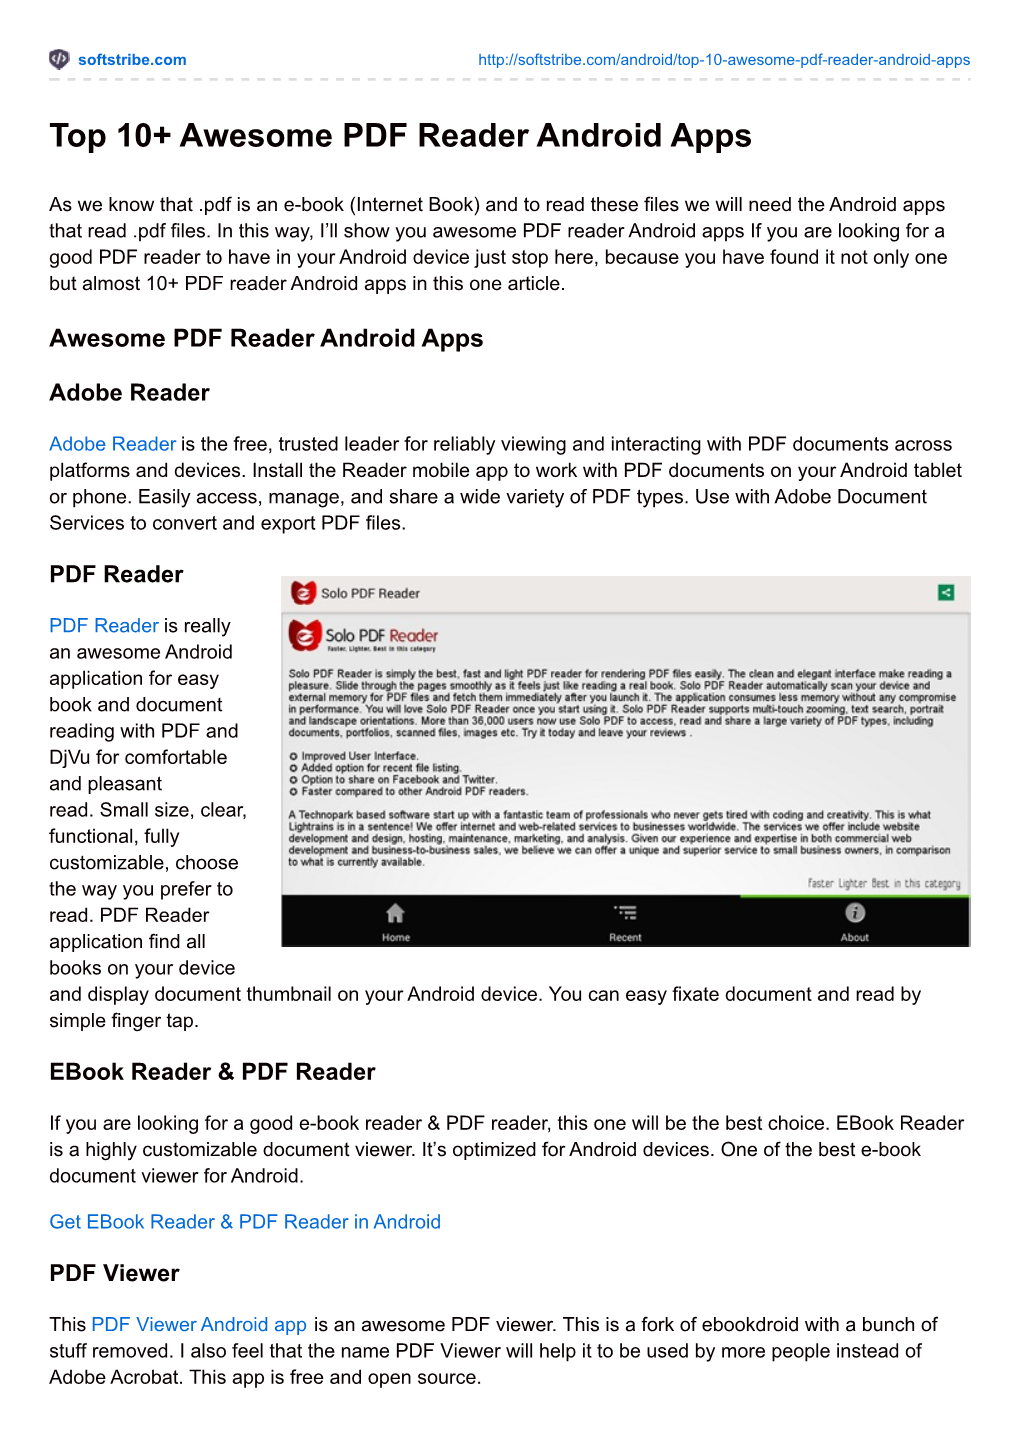 Top 10+ Awesome PDF Reader Android Apps